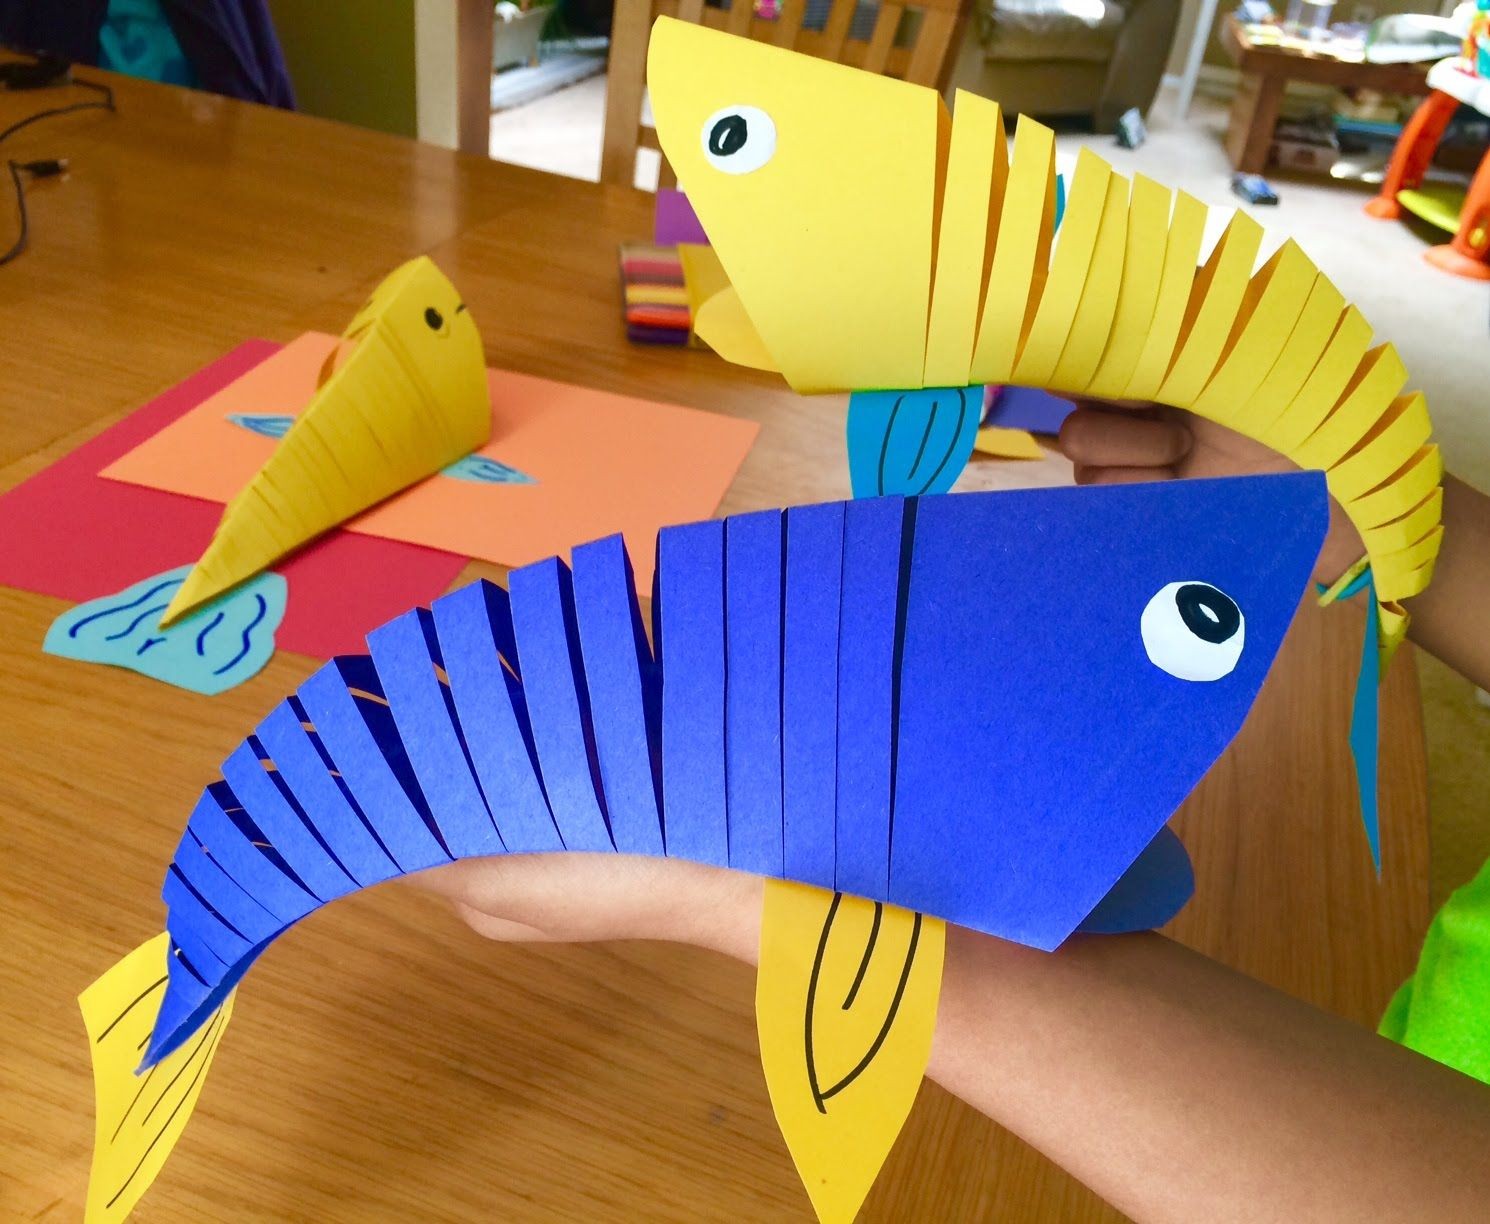 Moving Papercraft How to Make Moving Fish Paper Craft